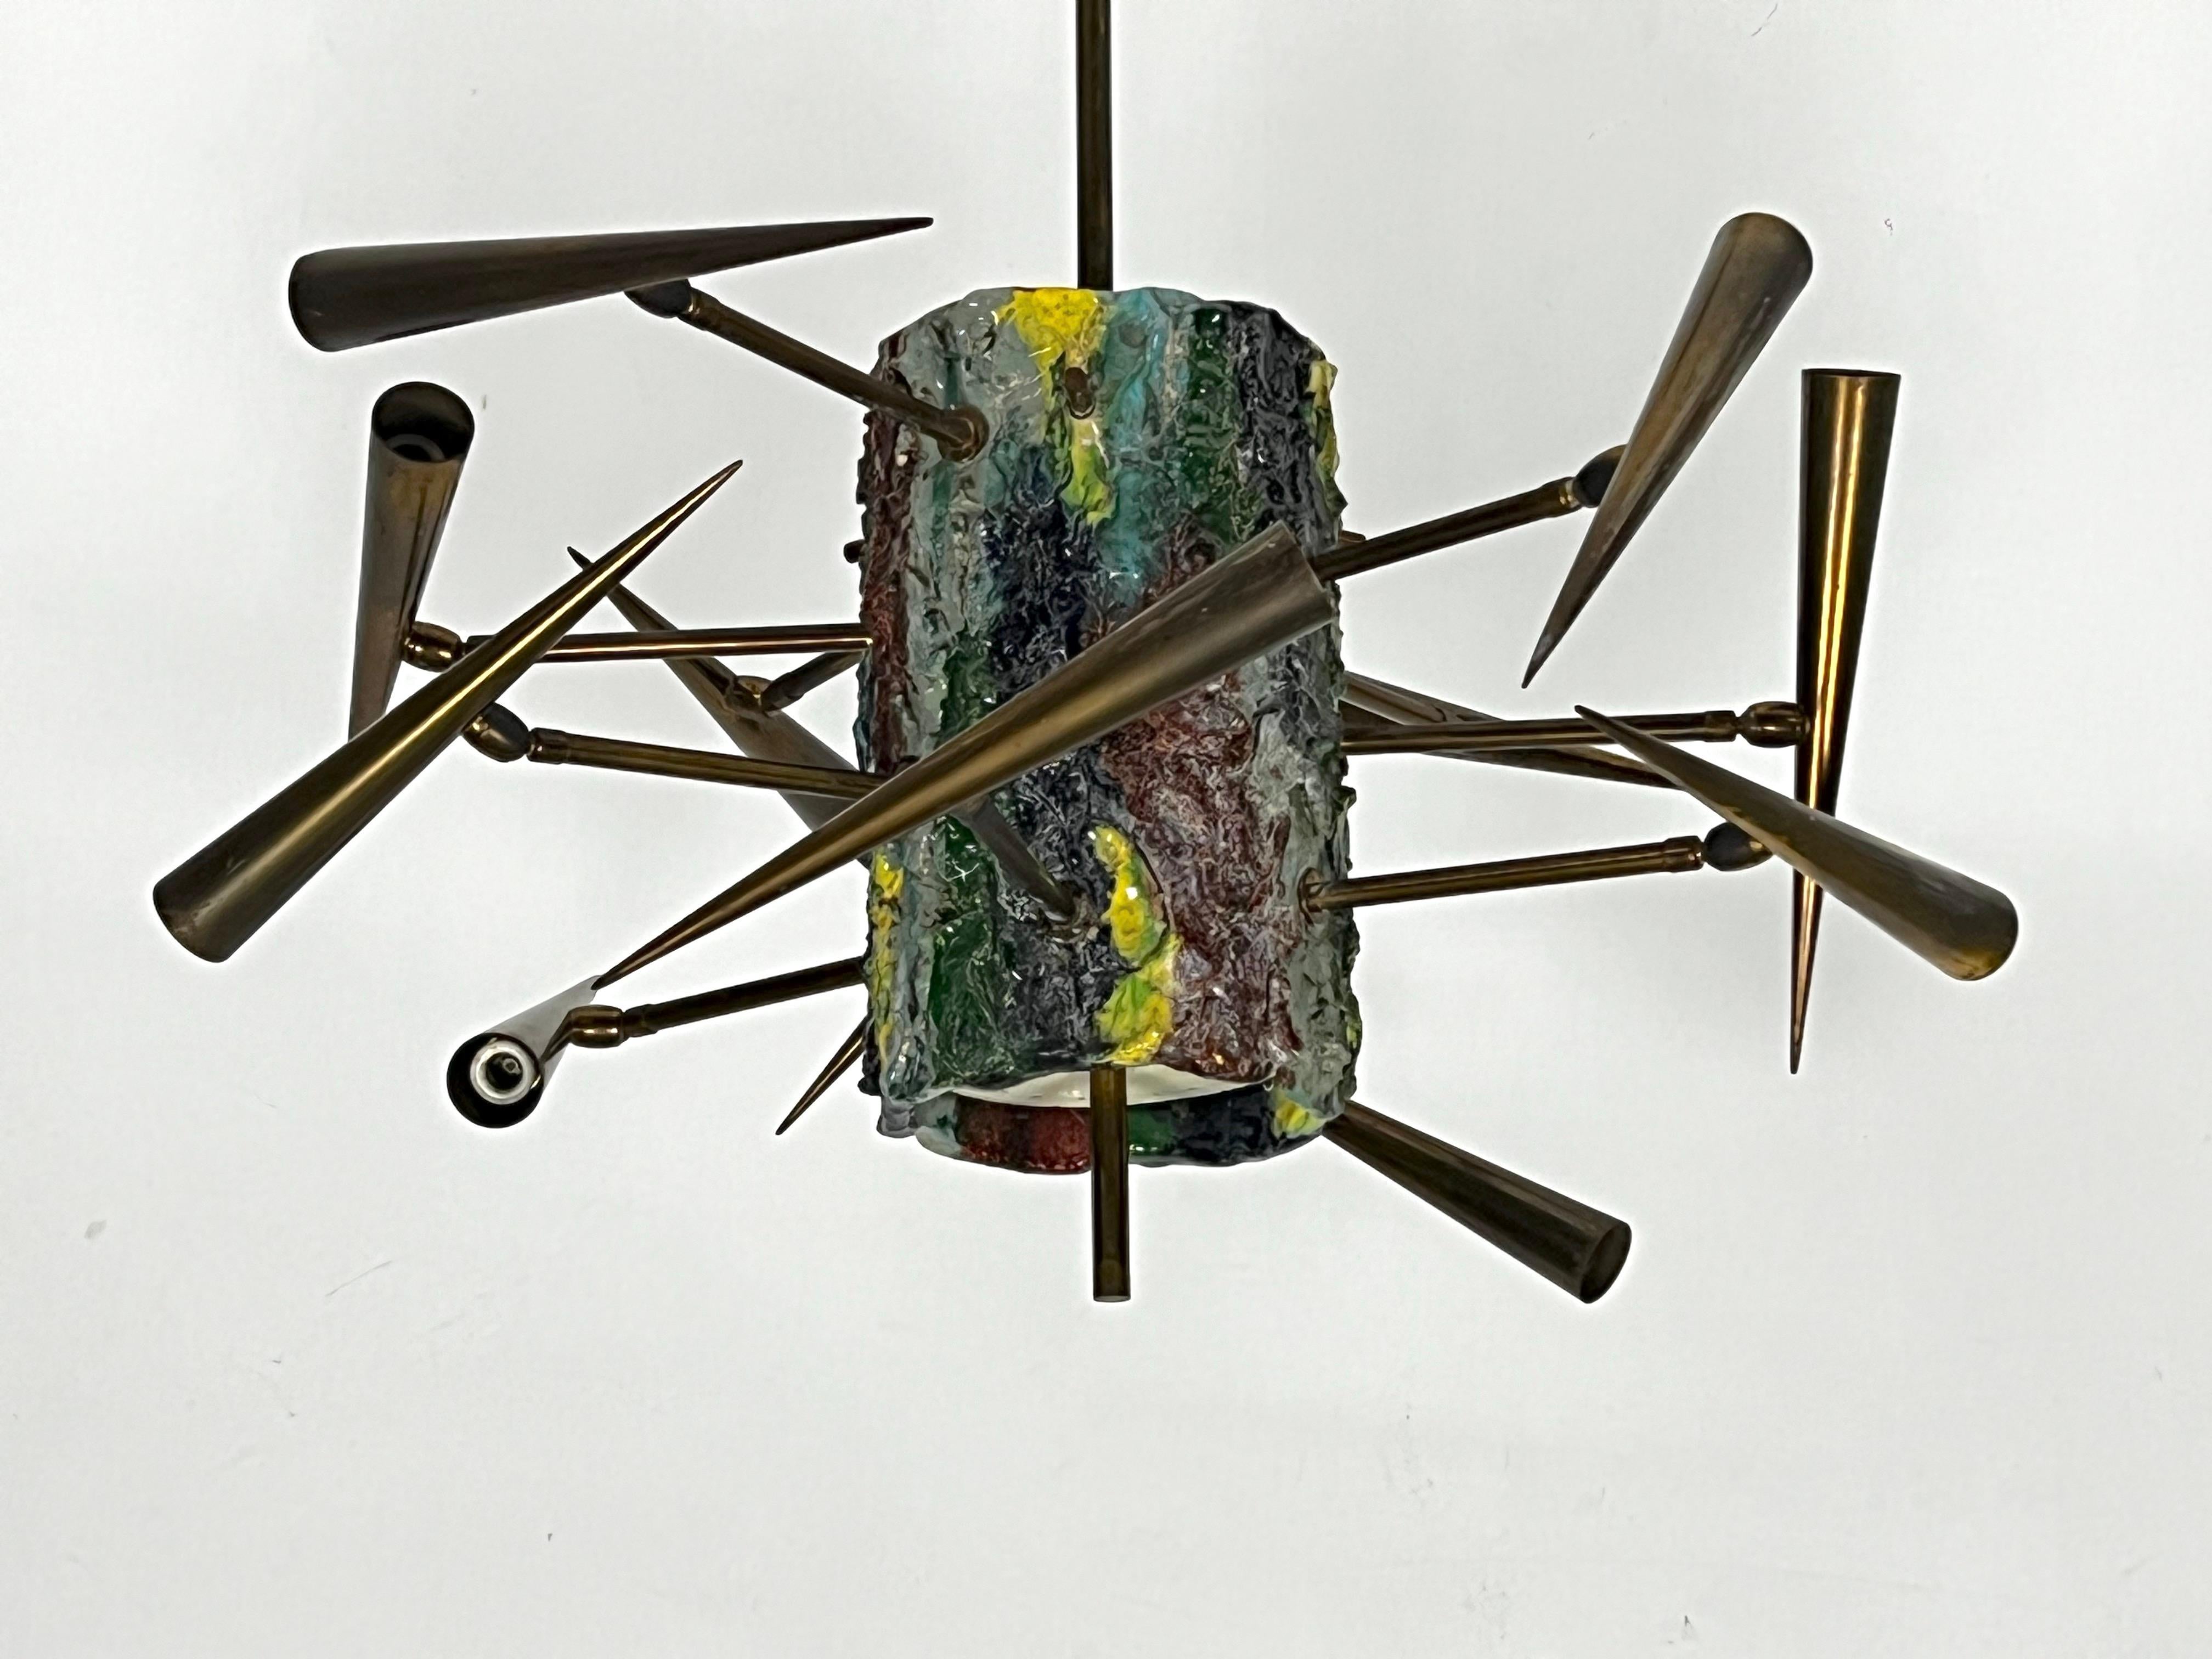 Mid-Century Sculptural chandelier composed of a ceramic painted cylinder and 12 brass arms with orientable cones. Made by thewell know Italian sculptor Leoncillo Leonardi in 1952.
Unaltered vintage condition with normal trace of age and use.